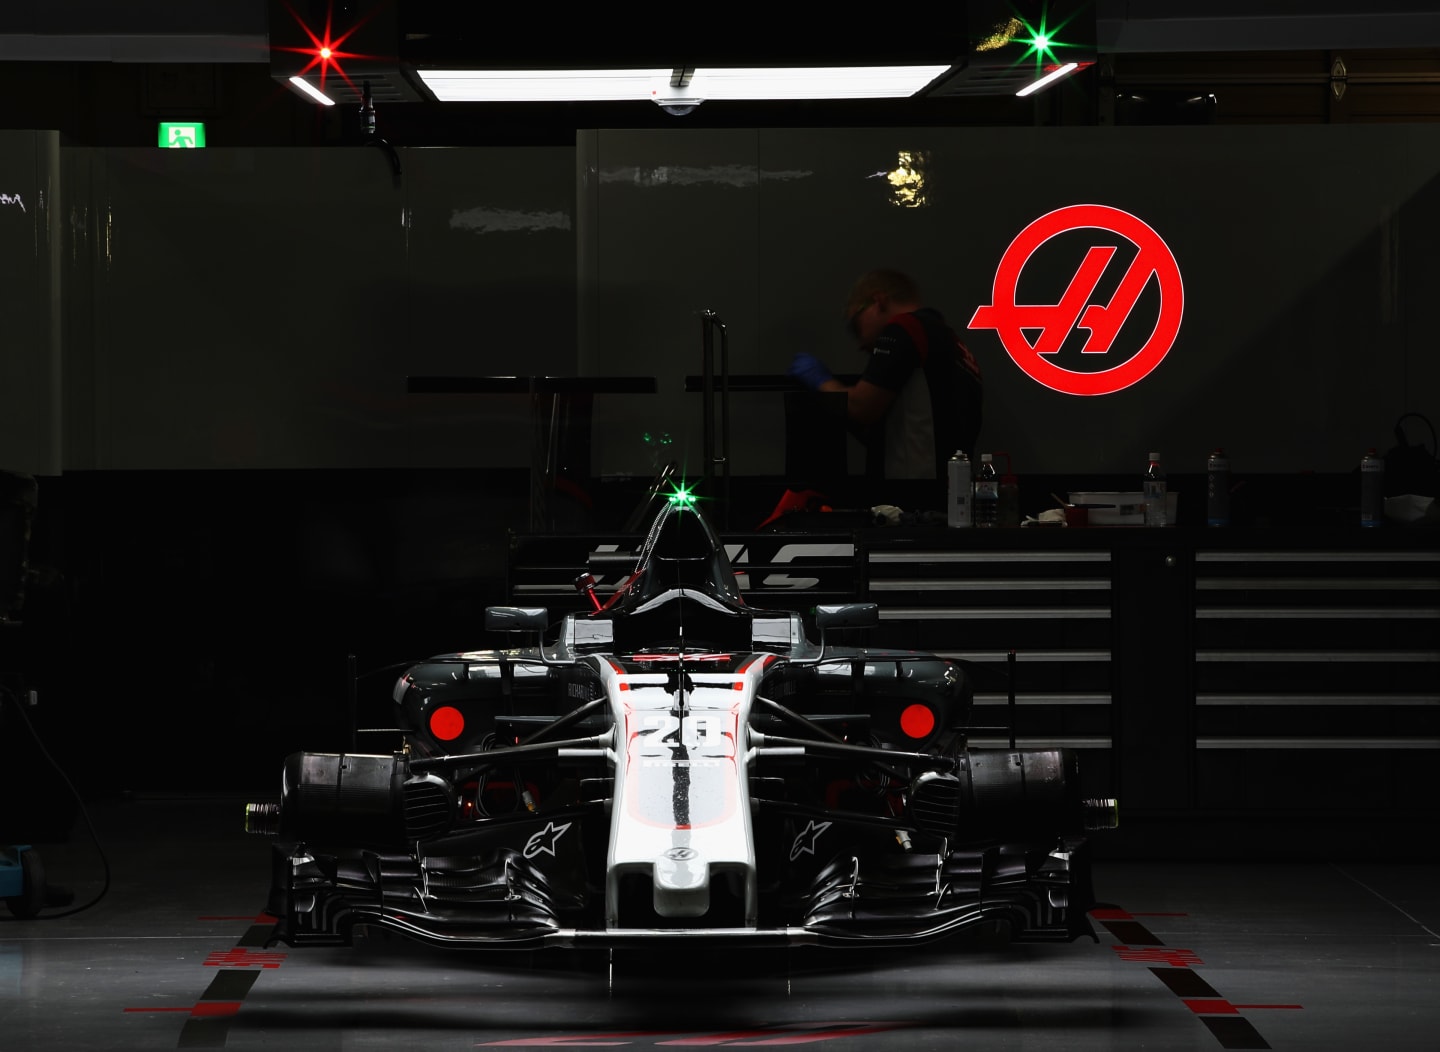 SUZUKA, JAPAN - OCTOBER 07: The car of Kevin Magnussen of Denmark and Haas F1 in the garage after